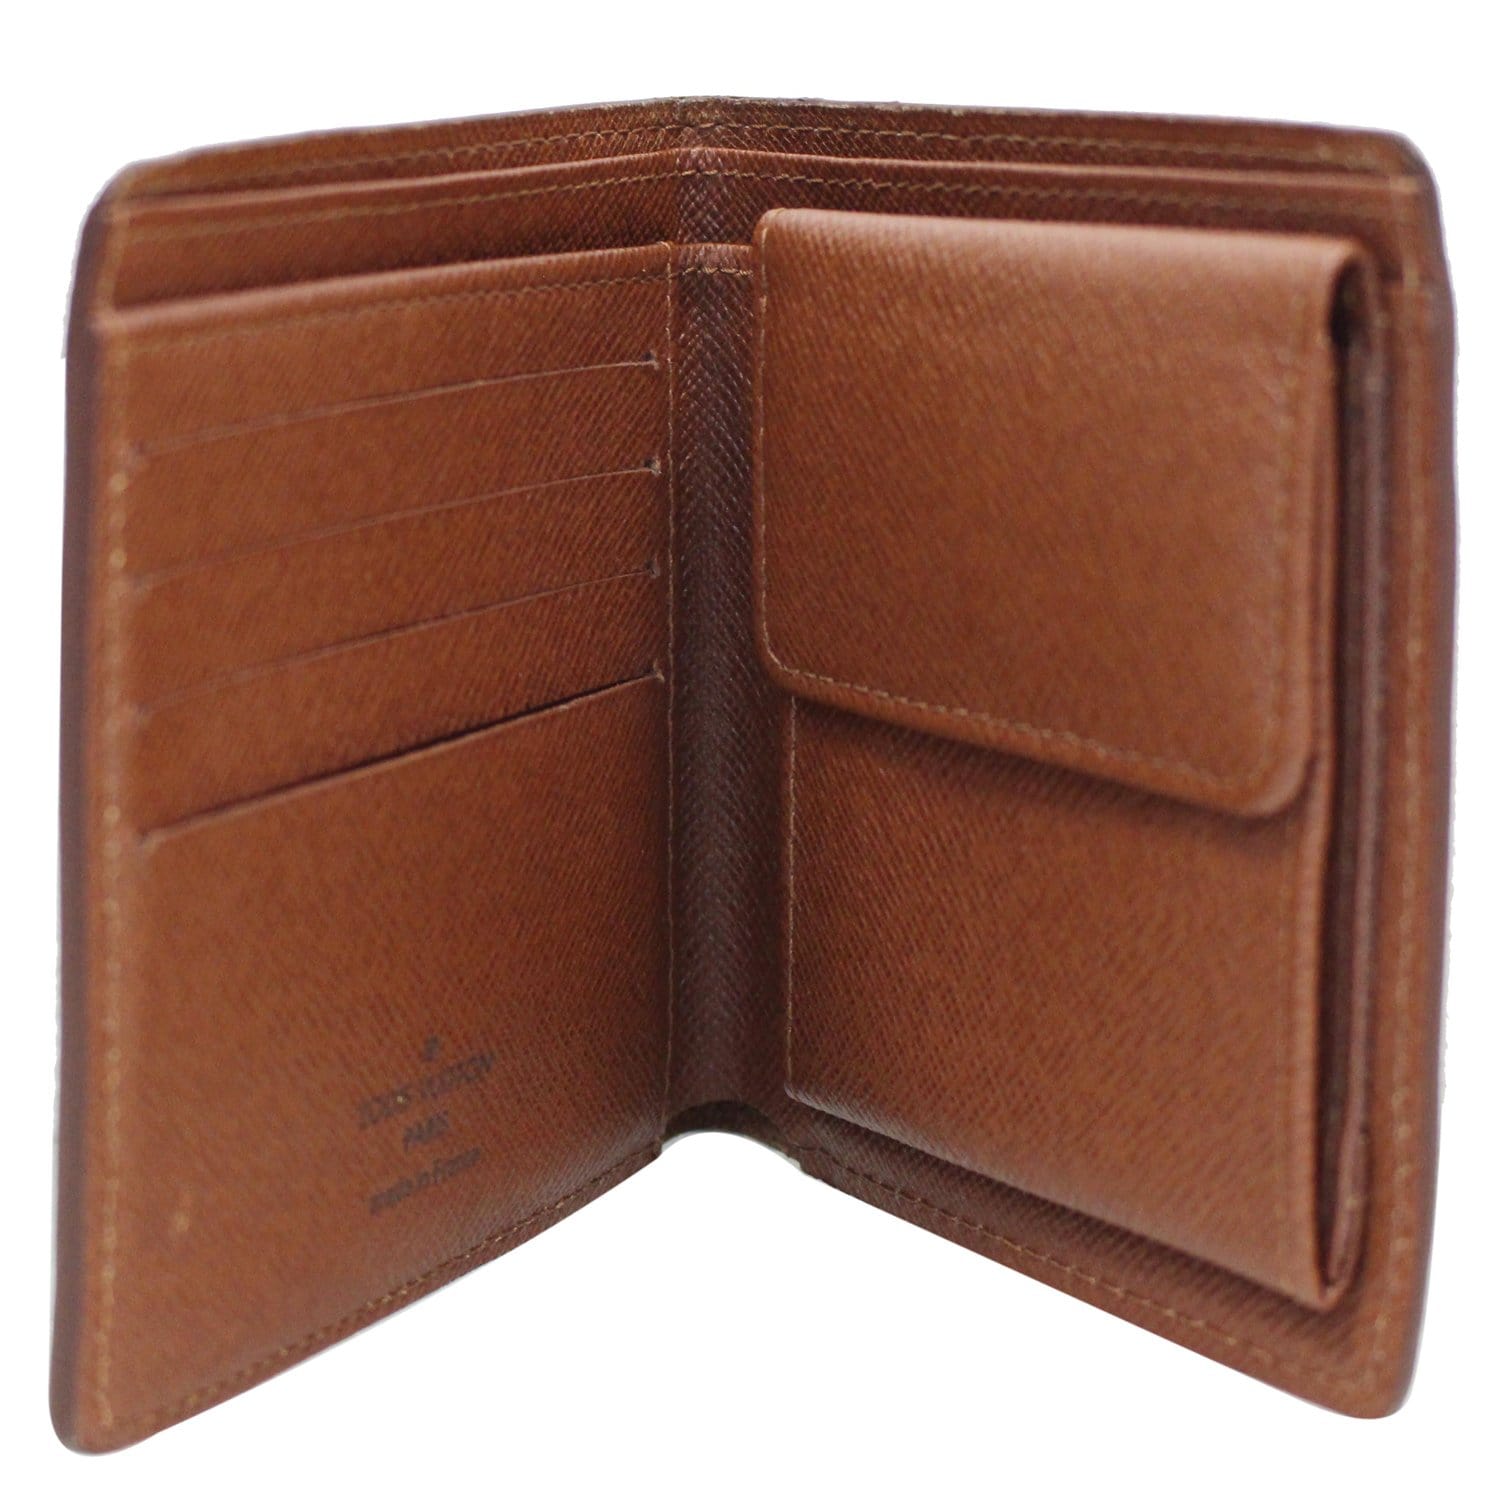 Louis Vuitton 2008 Pre-owned Portefeuille Marco Wallet - Brown